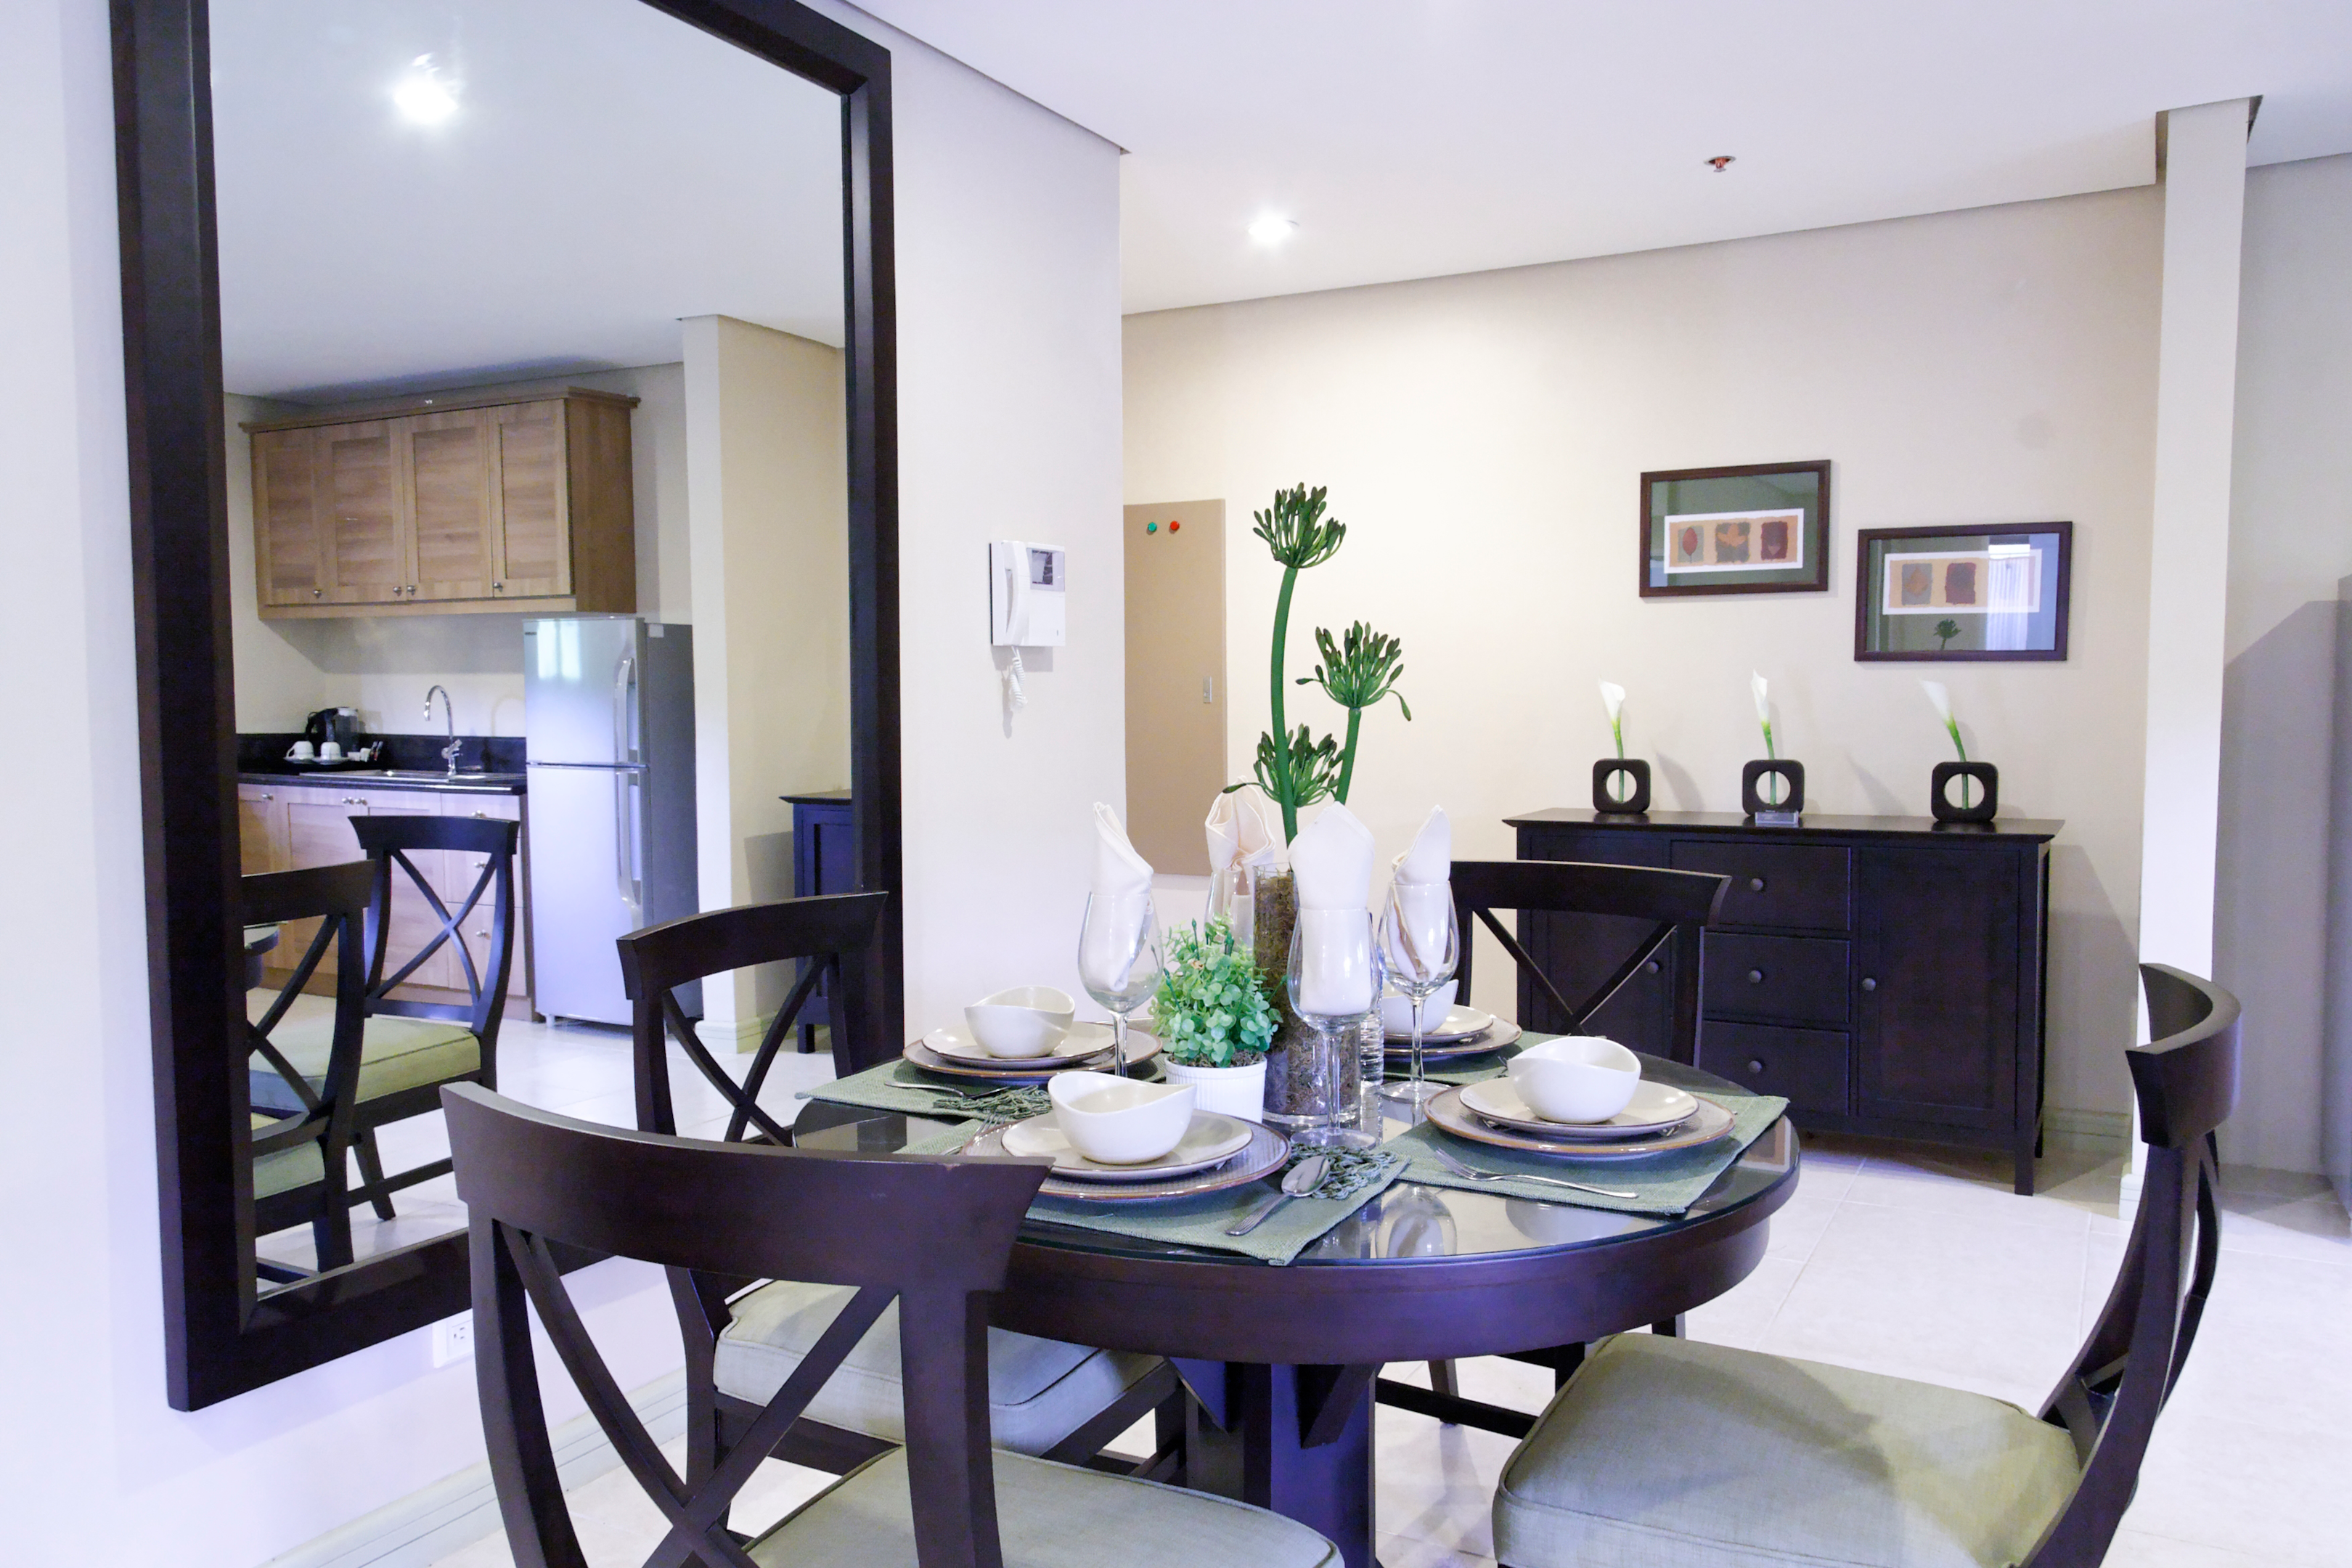 Image of the dining area with glass mirror in front of the dining table | one bedroom unit rfo condo in tagaytay